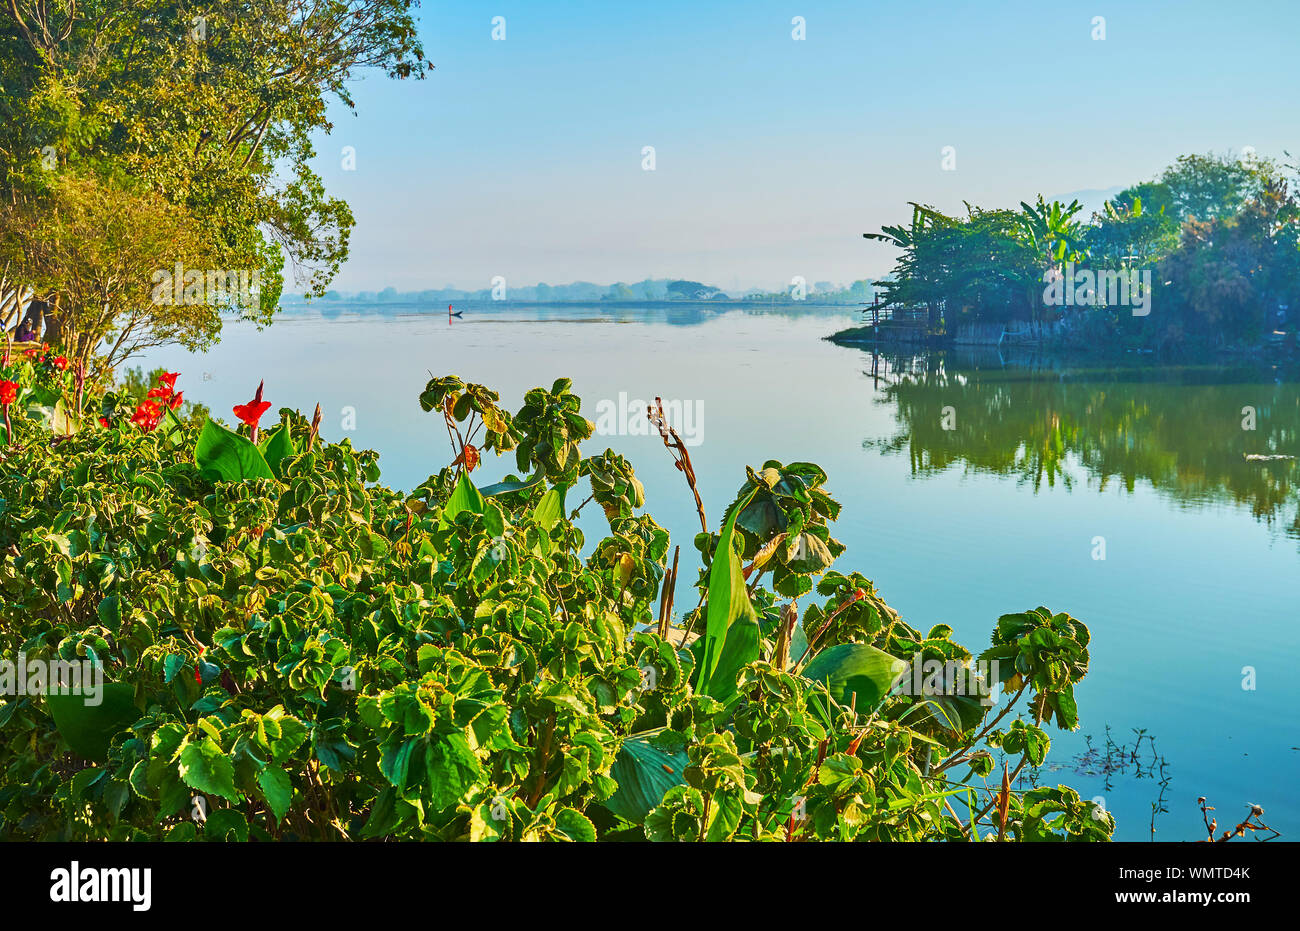 Relax on the bank of Tharzi pond and watch its clear surface, surrounded by lush greenery, Nyaungshwe, Myanmar Stock Photo